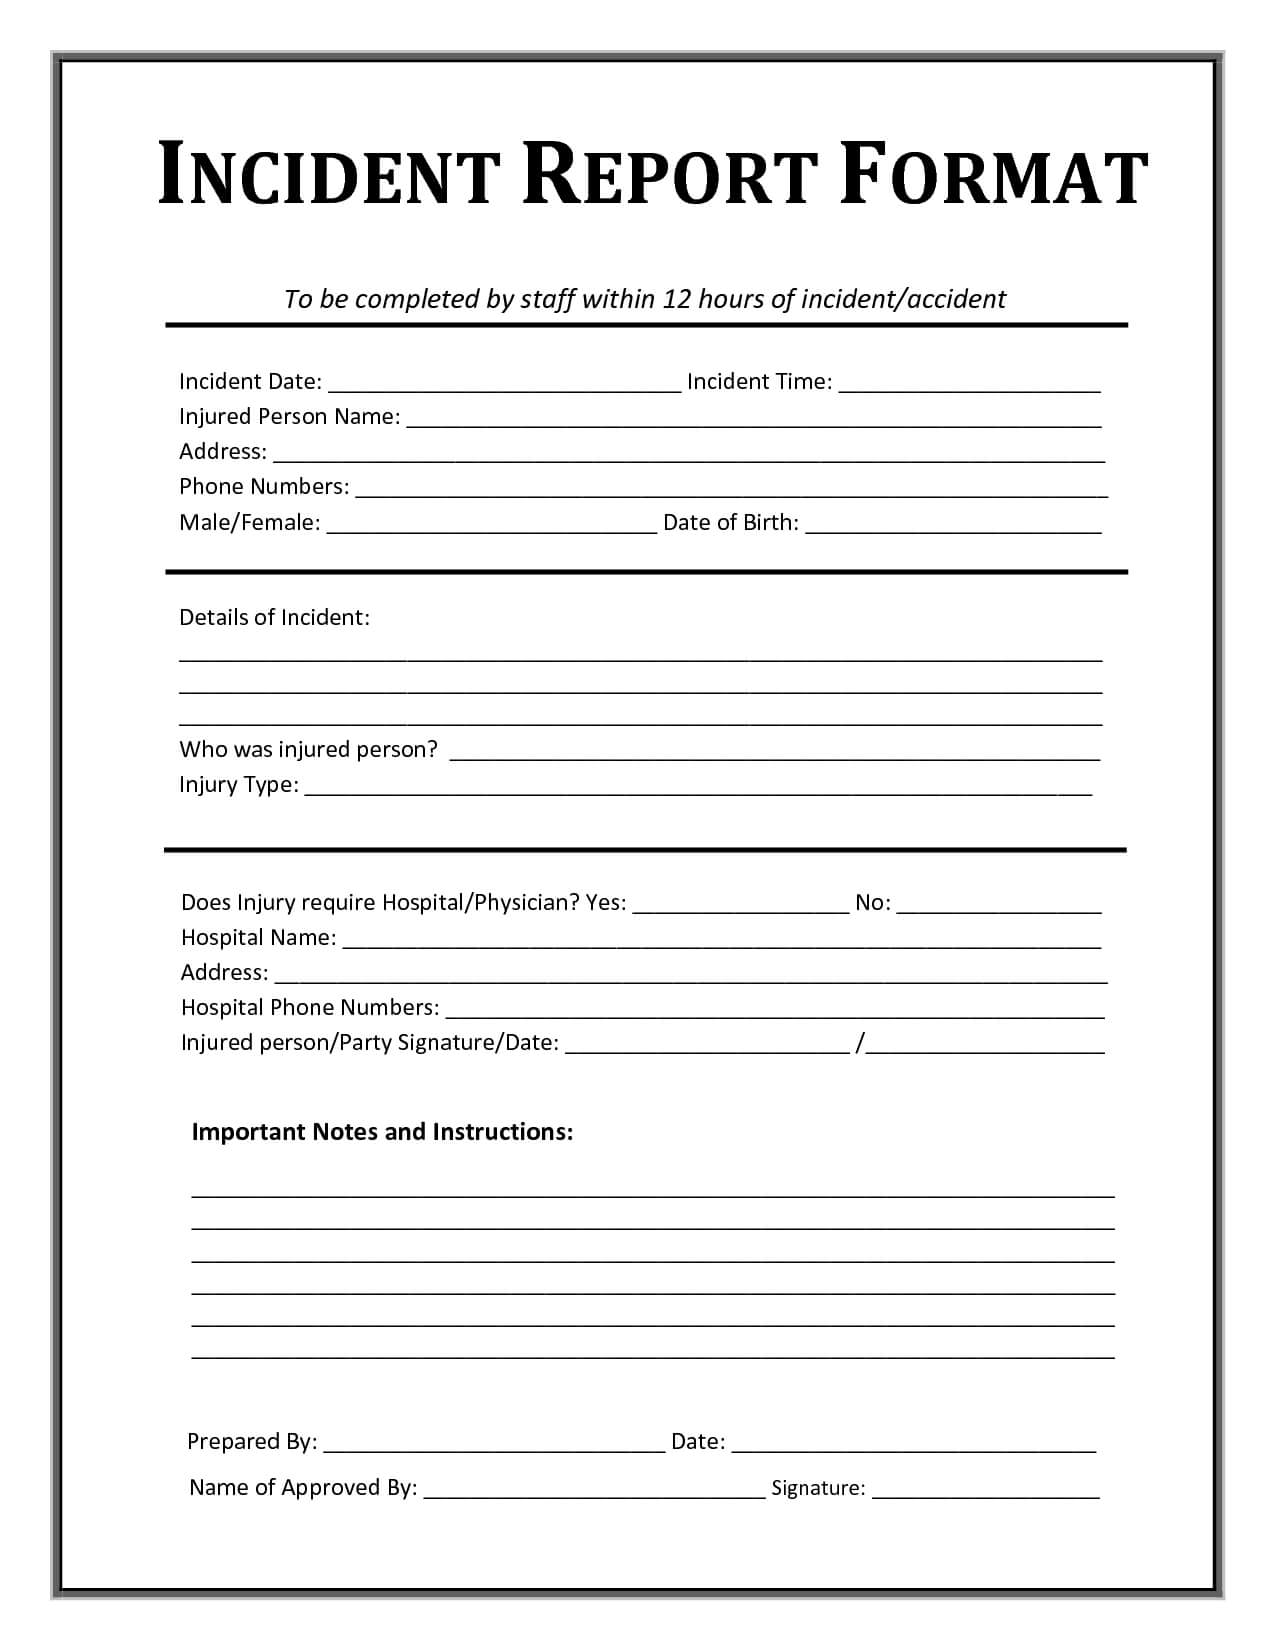 Incident Report Template | Incident Report Form, Incident Within Insurance Incident Report Template